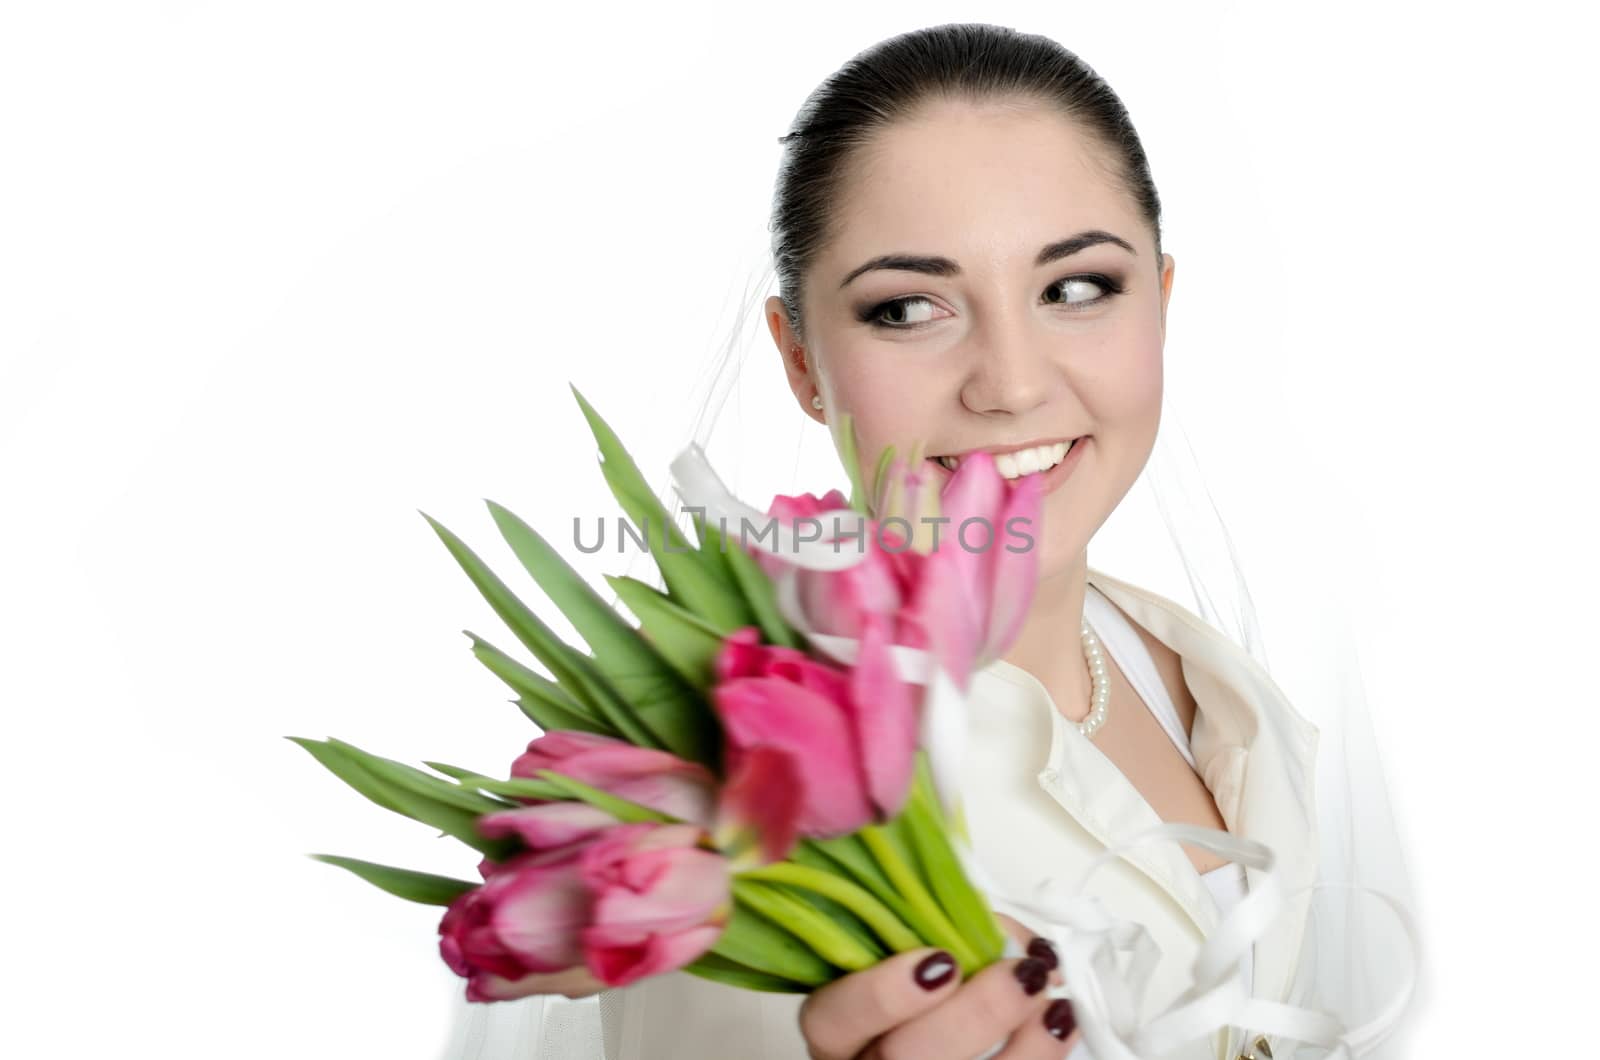 Smiling bride throwing bouquet by bartekchiny